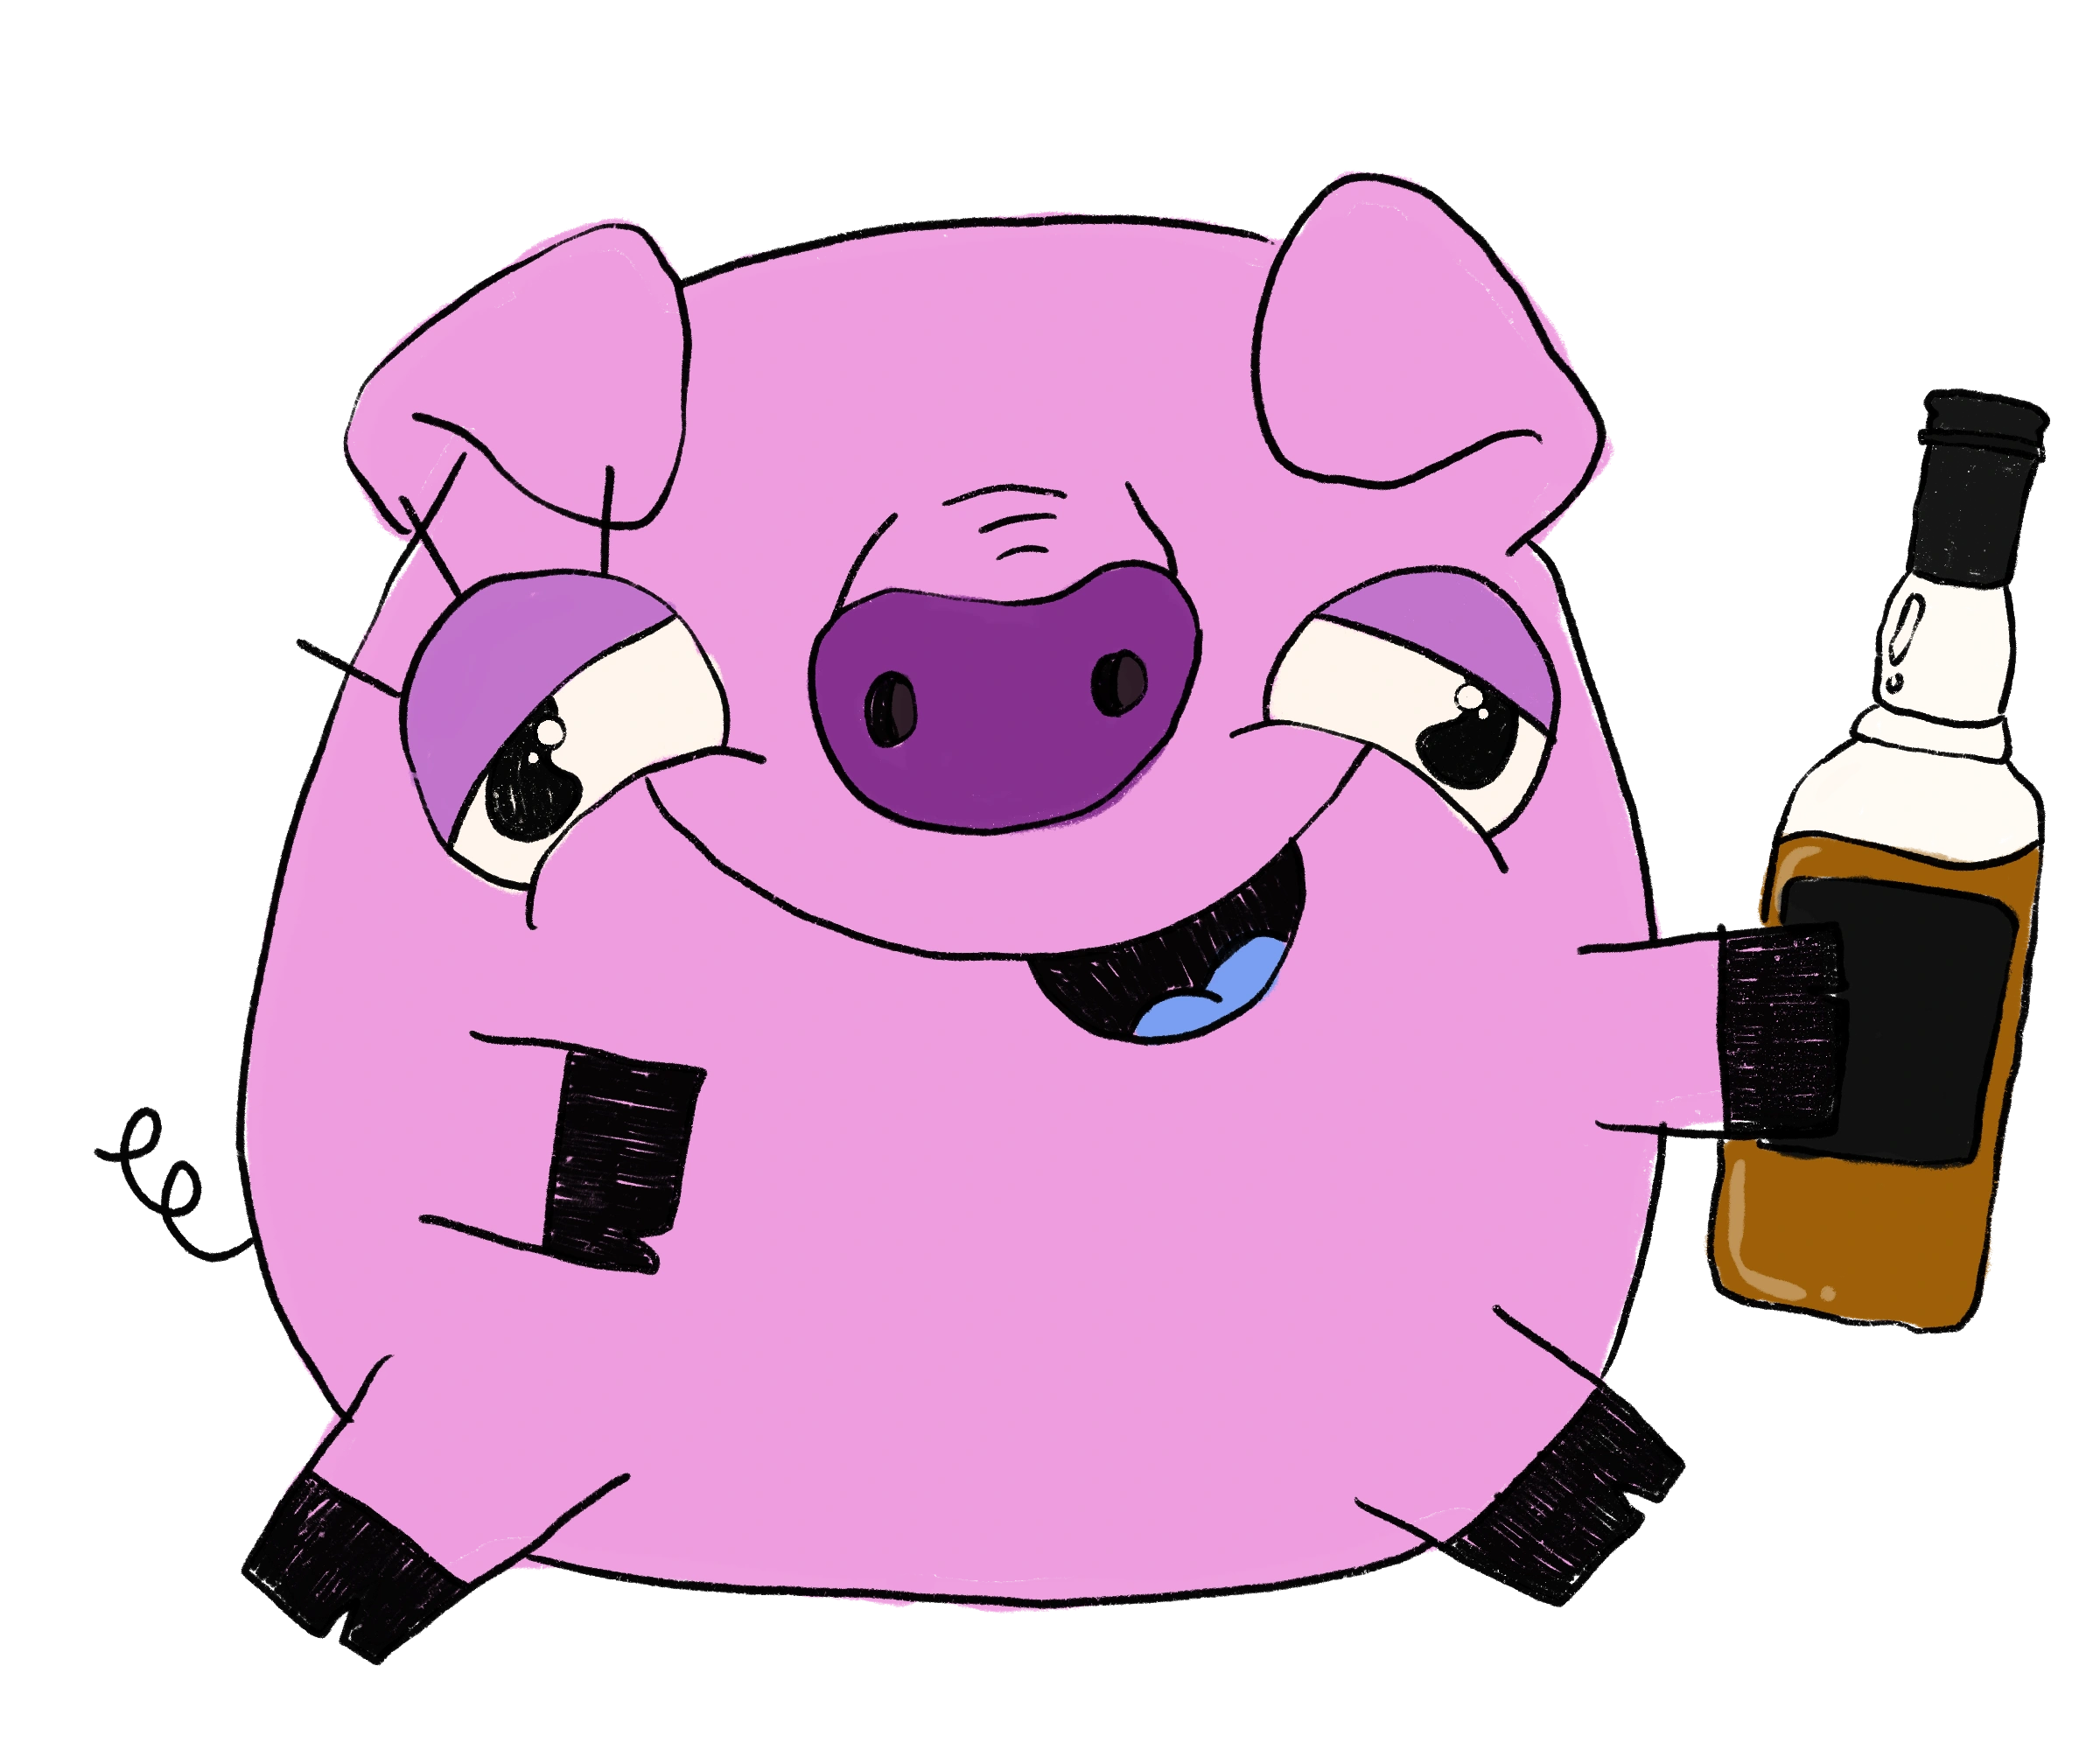 Picture of Pig holding bottle of alcohol representing the boozy line of candied bacon products